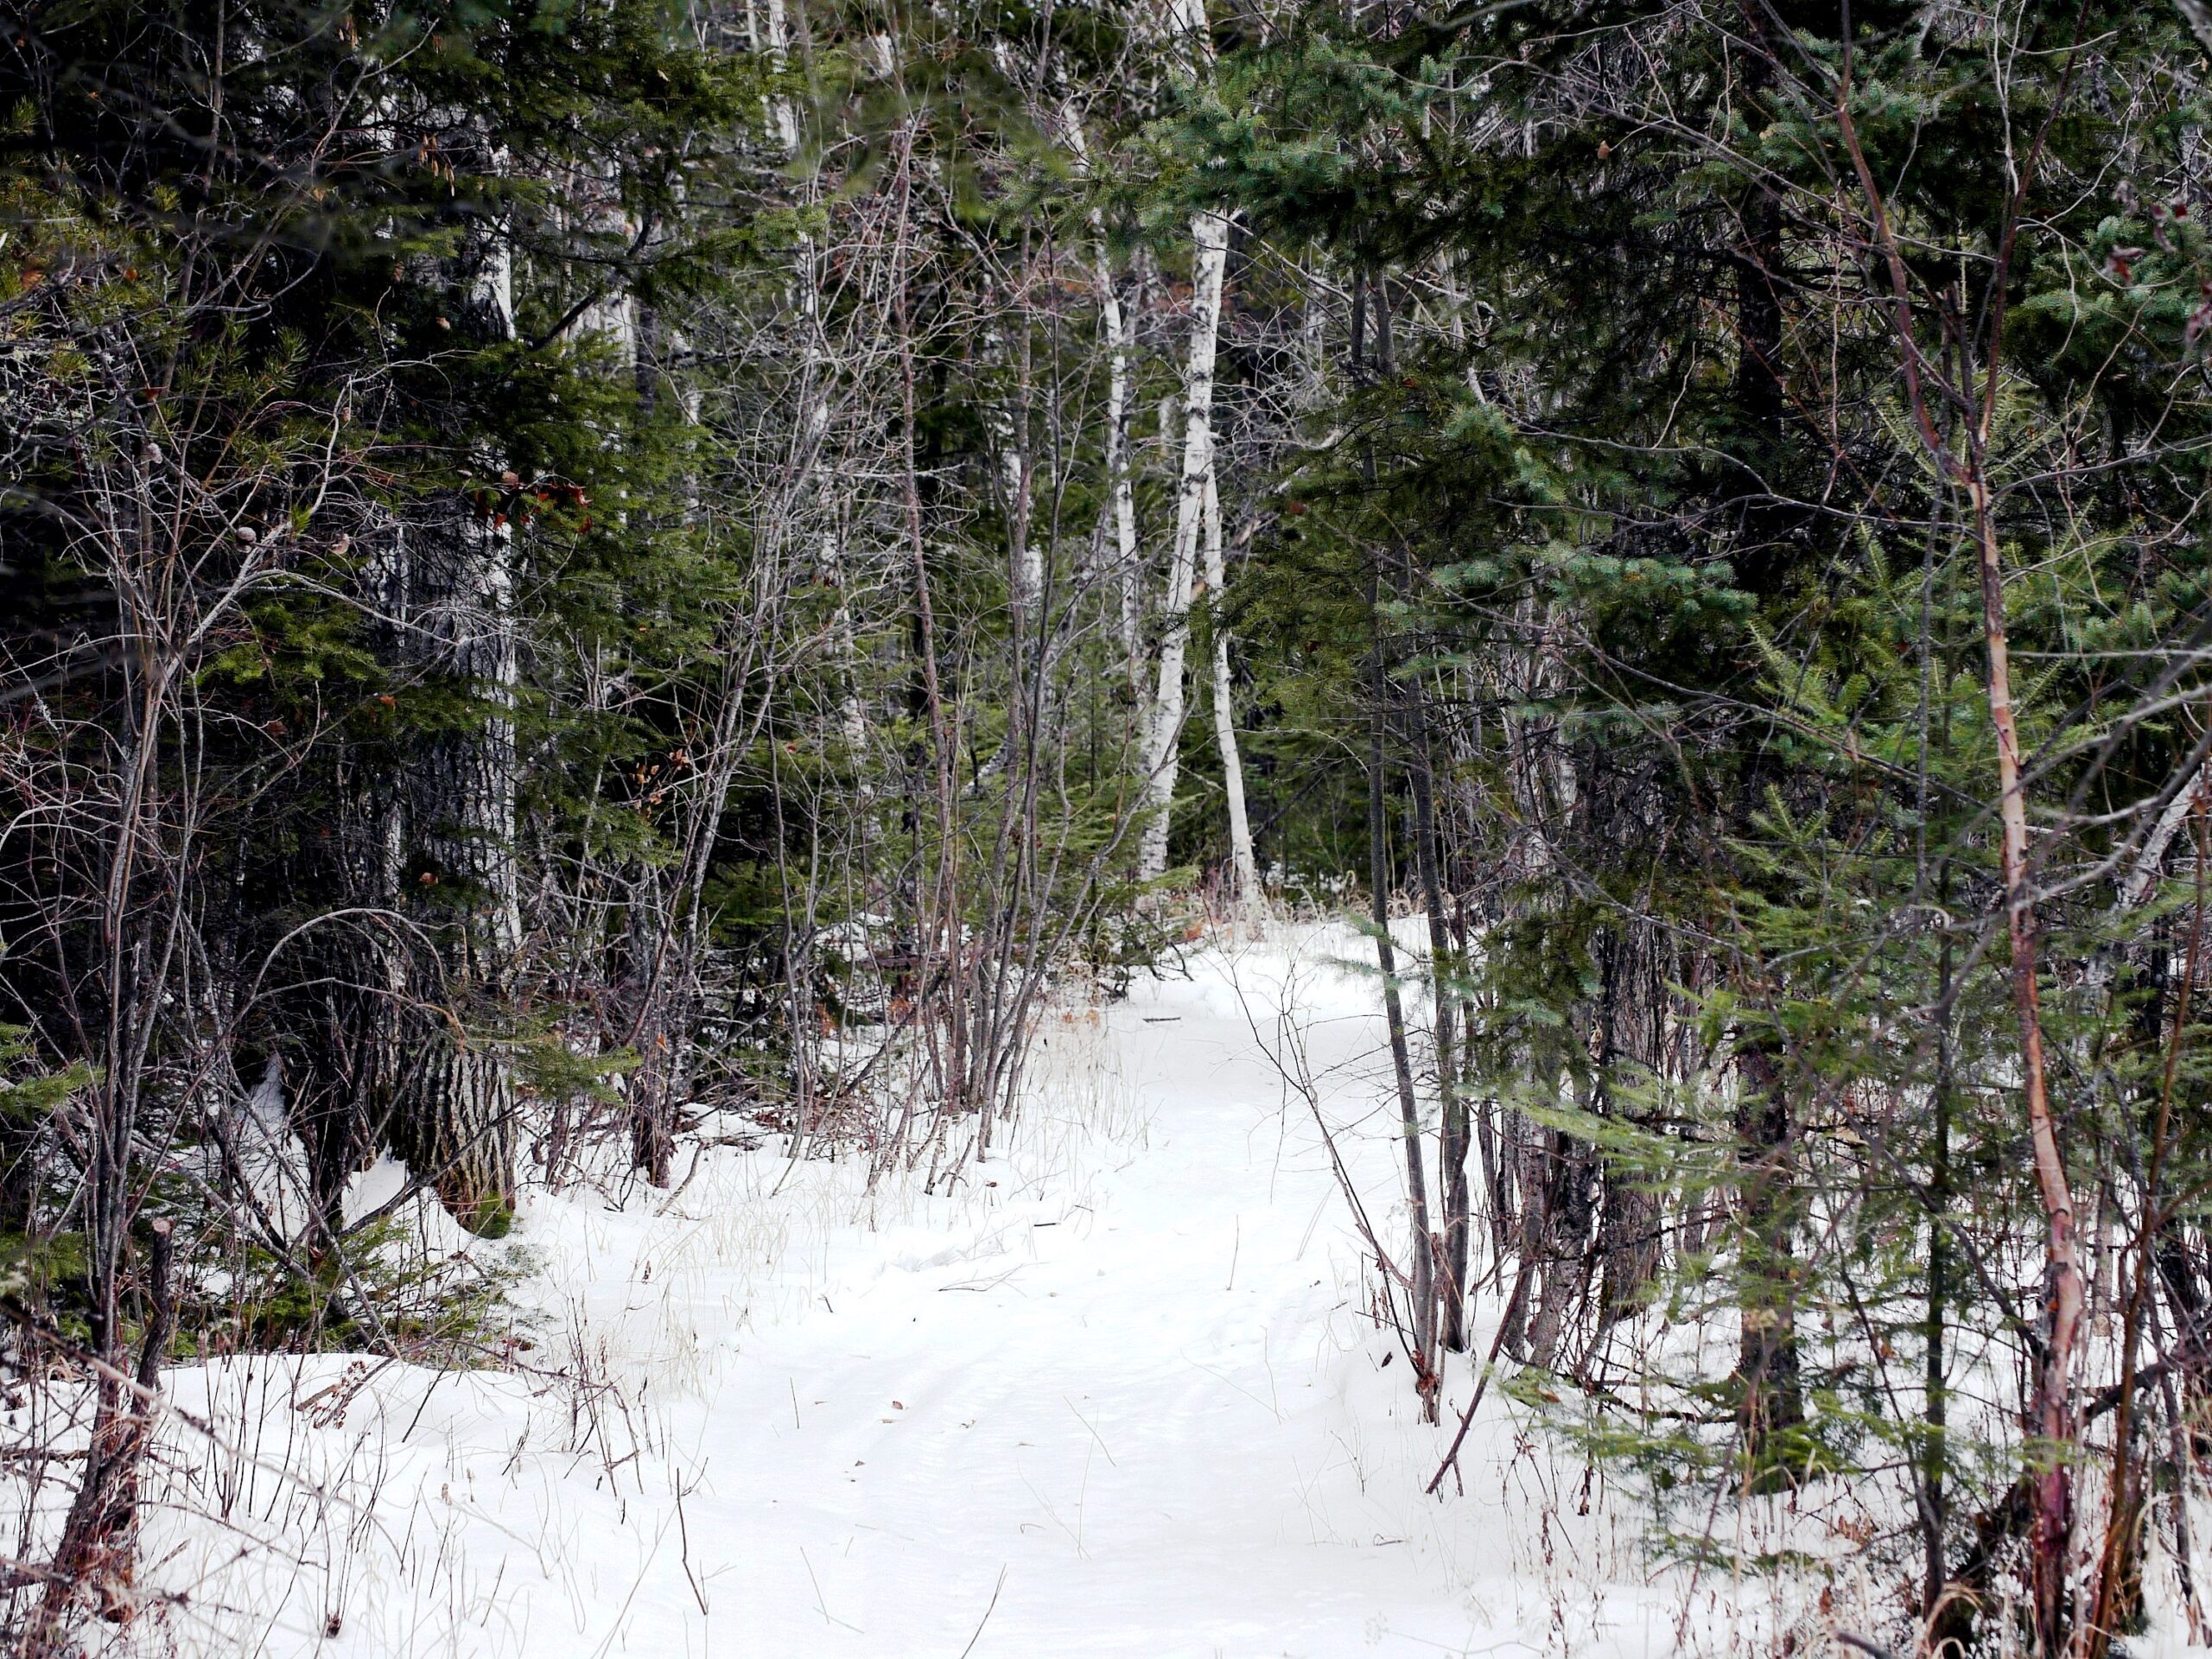 A snow-covered trail through a boreal forest.